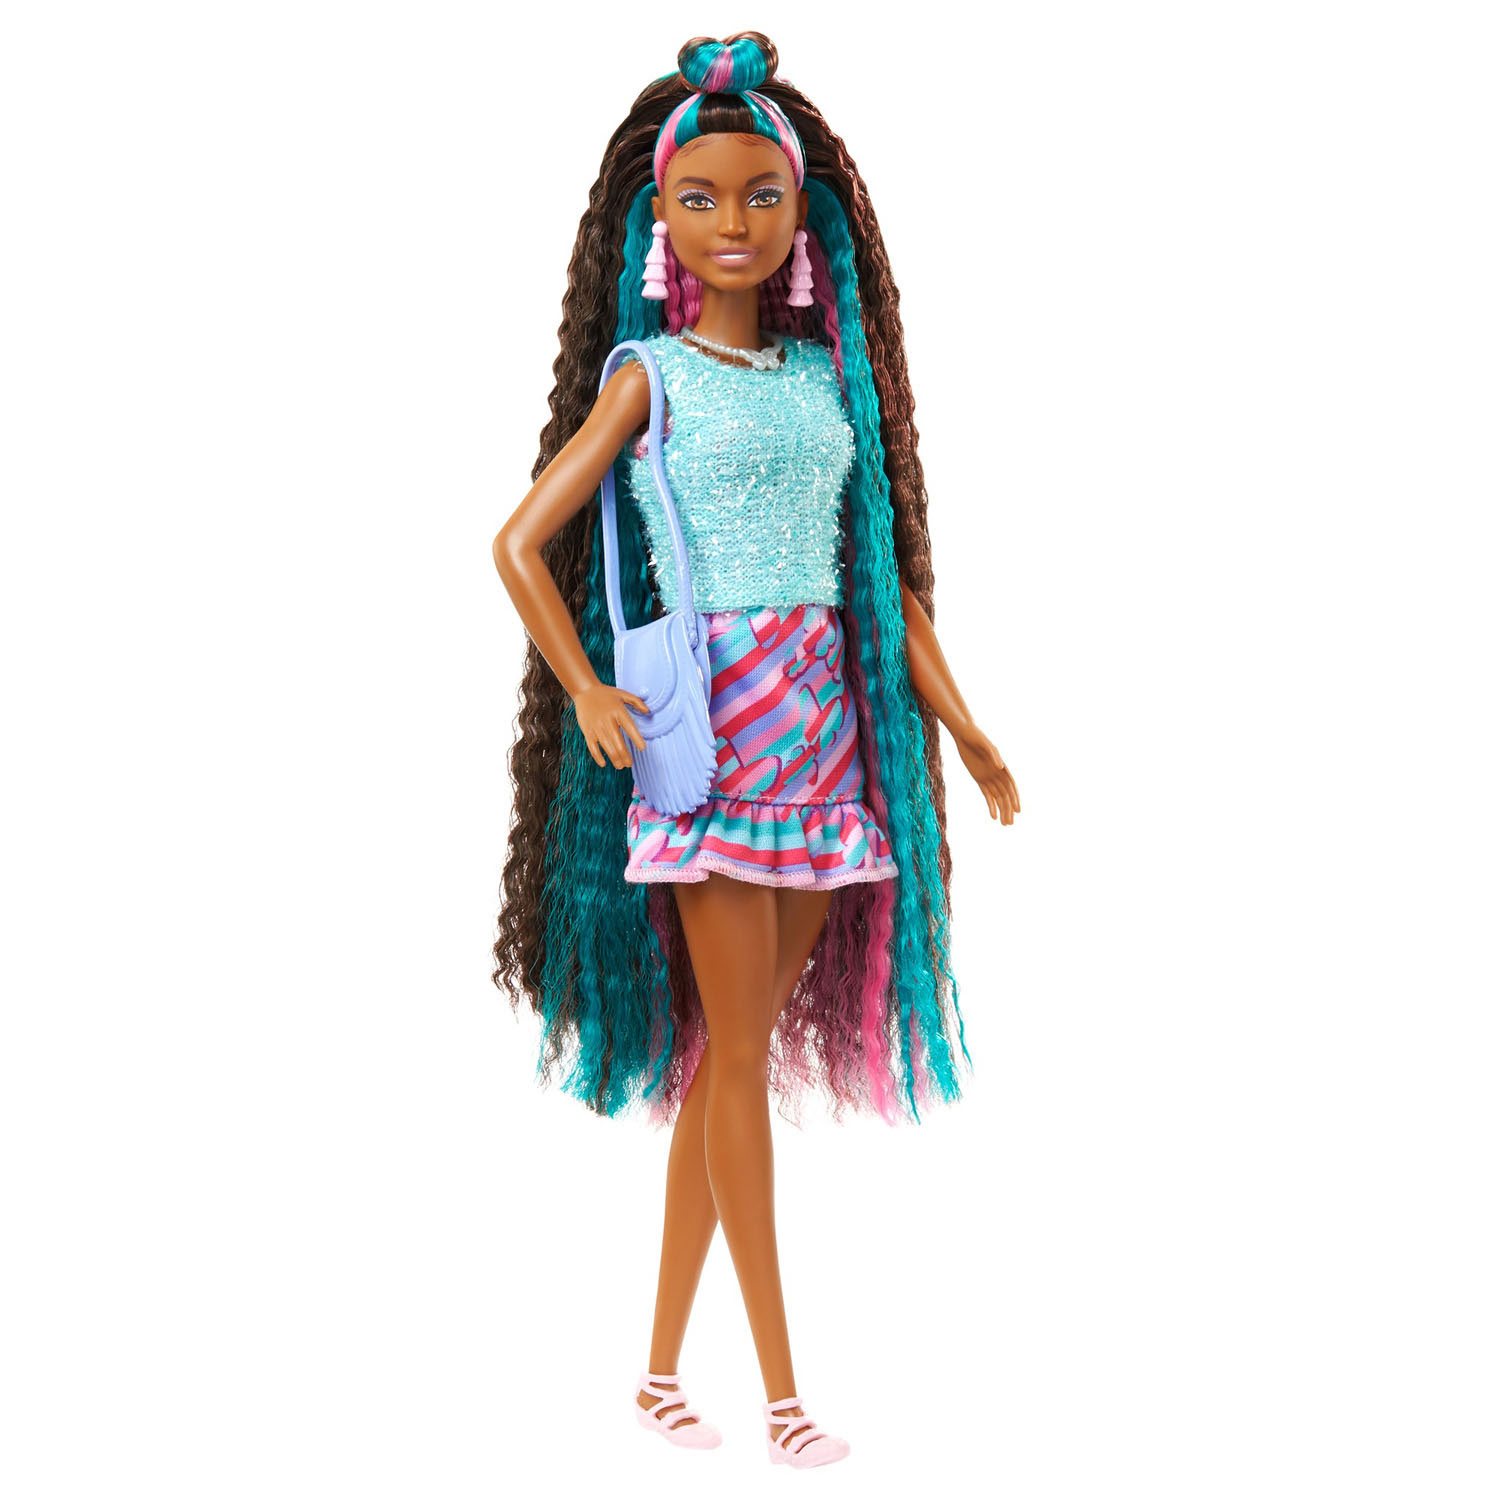 Barbie Pop Totally Hair - Butterfly